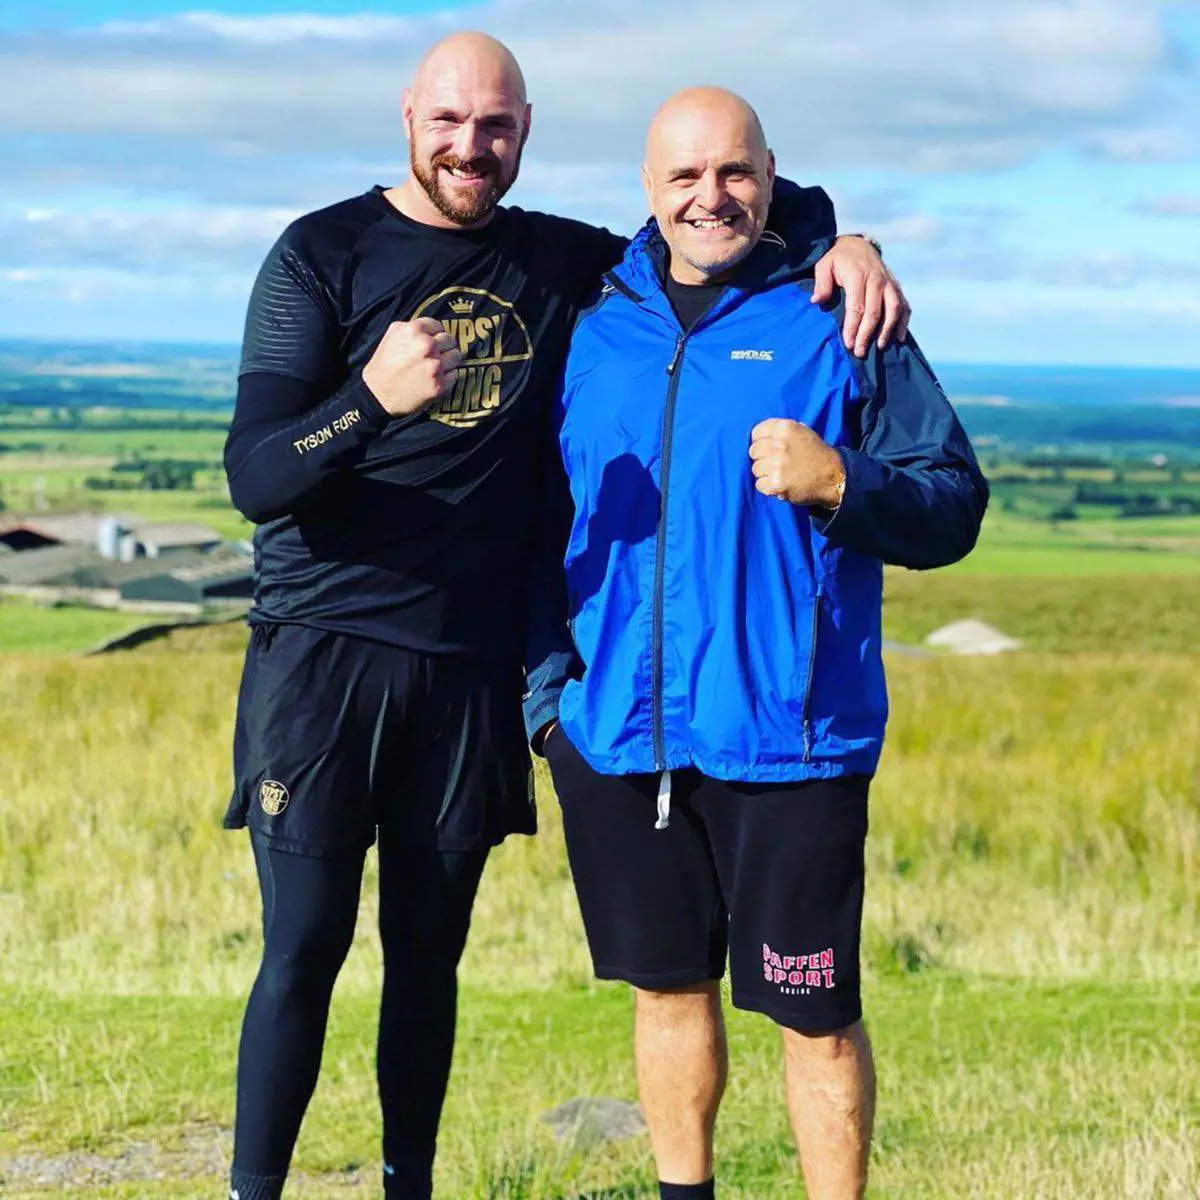 John and Tyson striking pose donning Gypsy Kings attire in September 2020